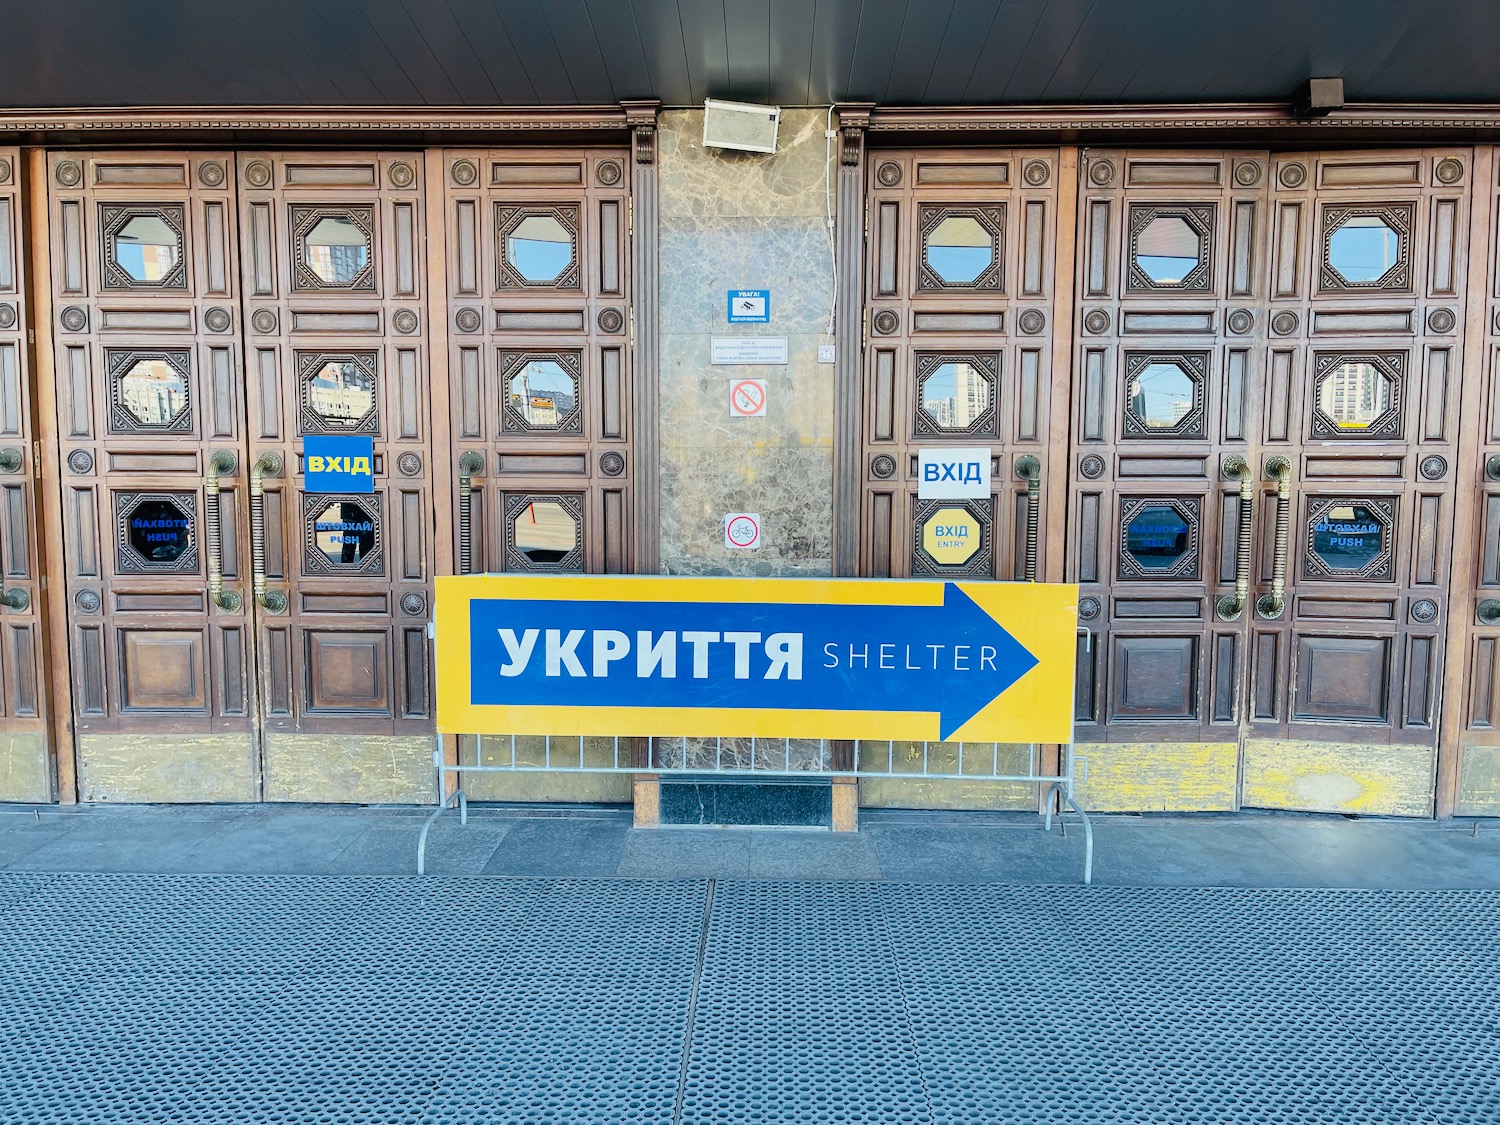 a sign in front of a building